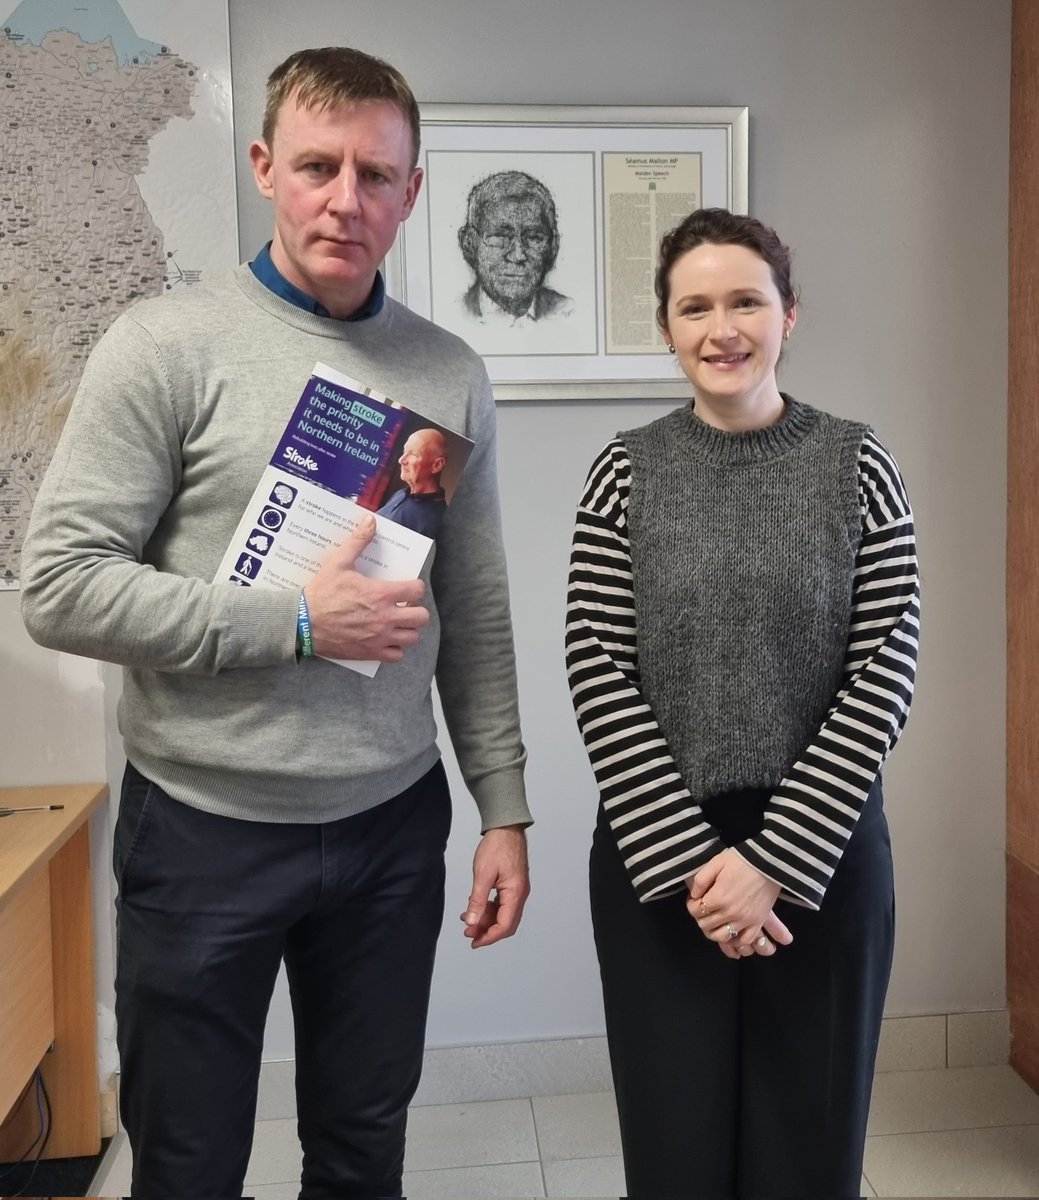 A great discussion with @JustinMcNu1ty today about the need for a 24/7 thrombectomy service in NI and ensuring access to emotional and psychological support for everyone affected by stroke. Thanks for your support to #MakeStrokeAPriority